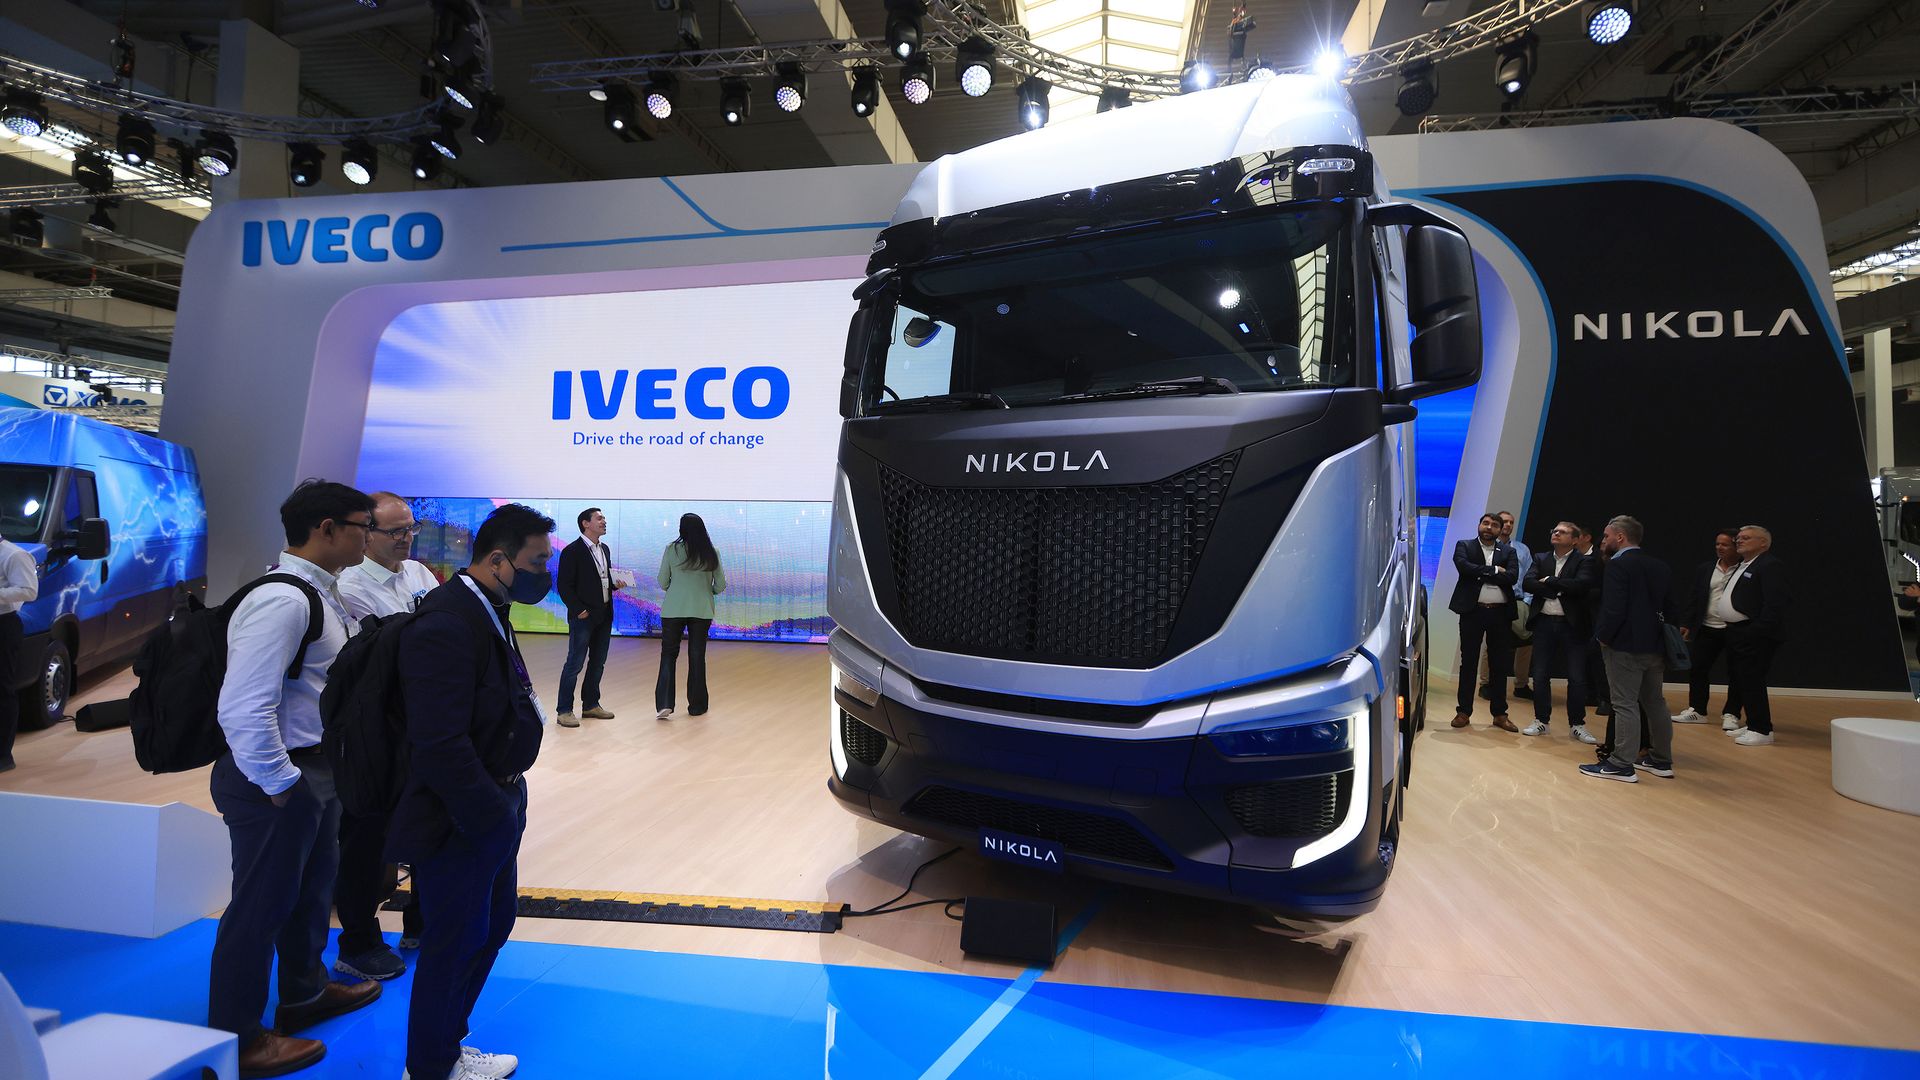 Nikola's fuel cell electric vehicle unveiled at the IAA Transportation event in Hanover, Germany.